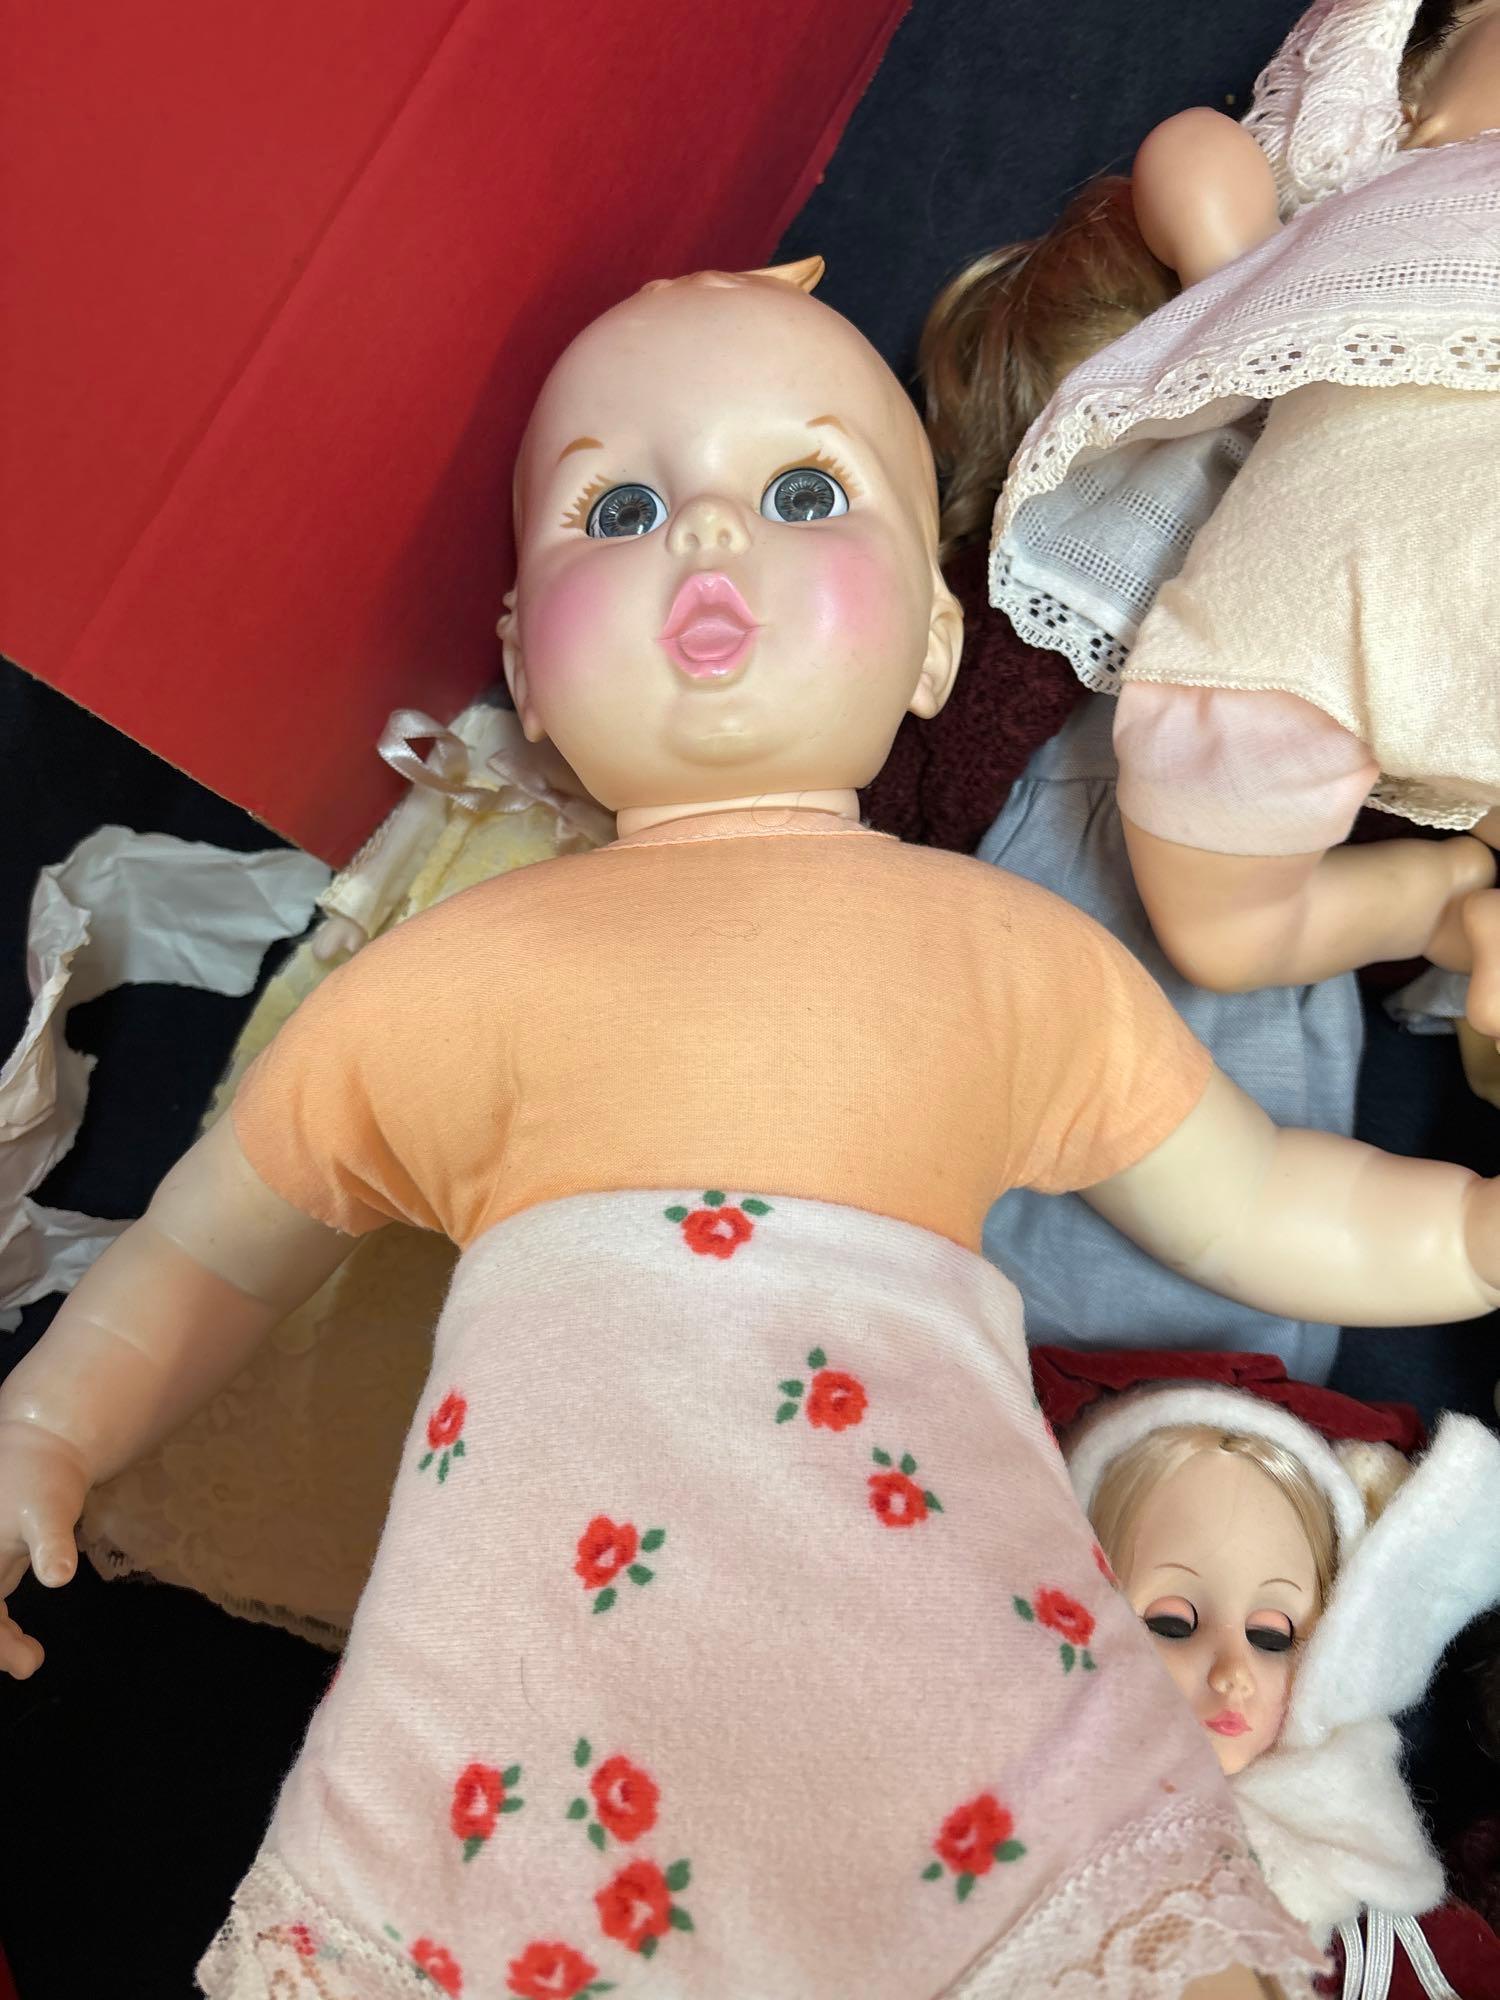 large collection of baby dolls